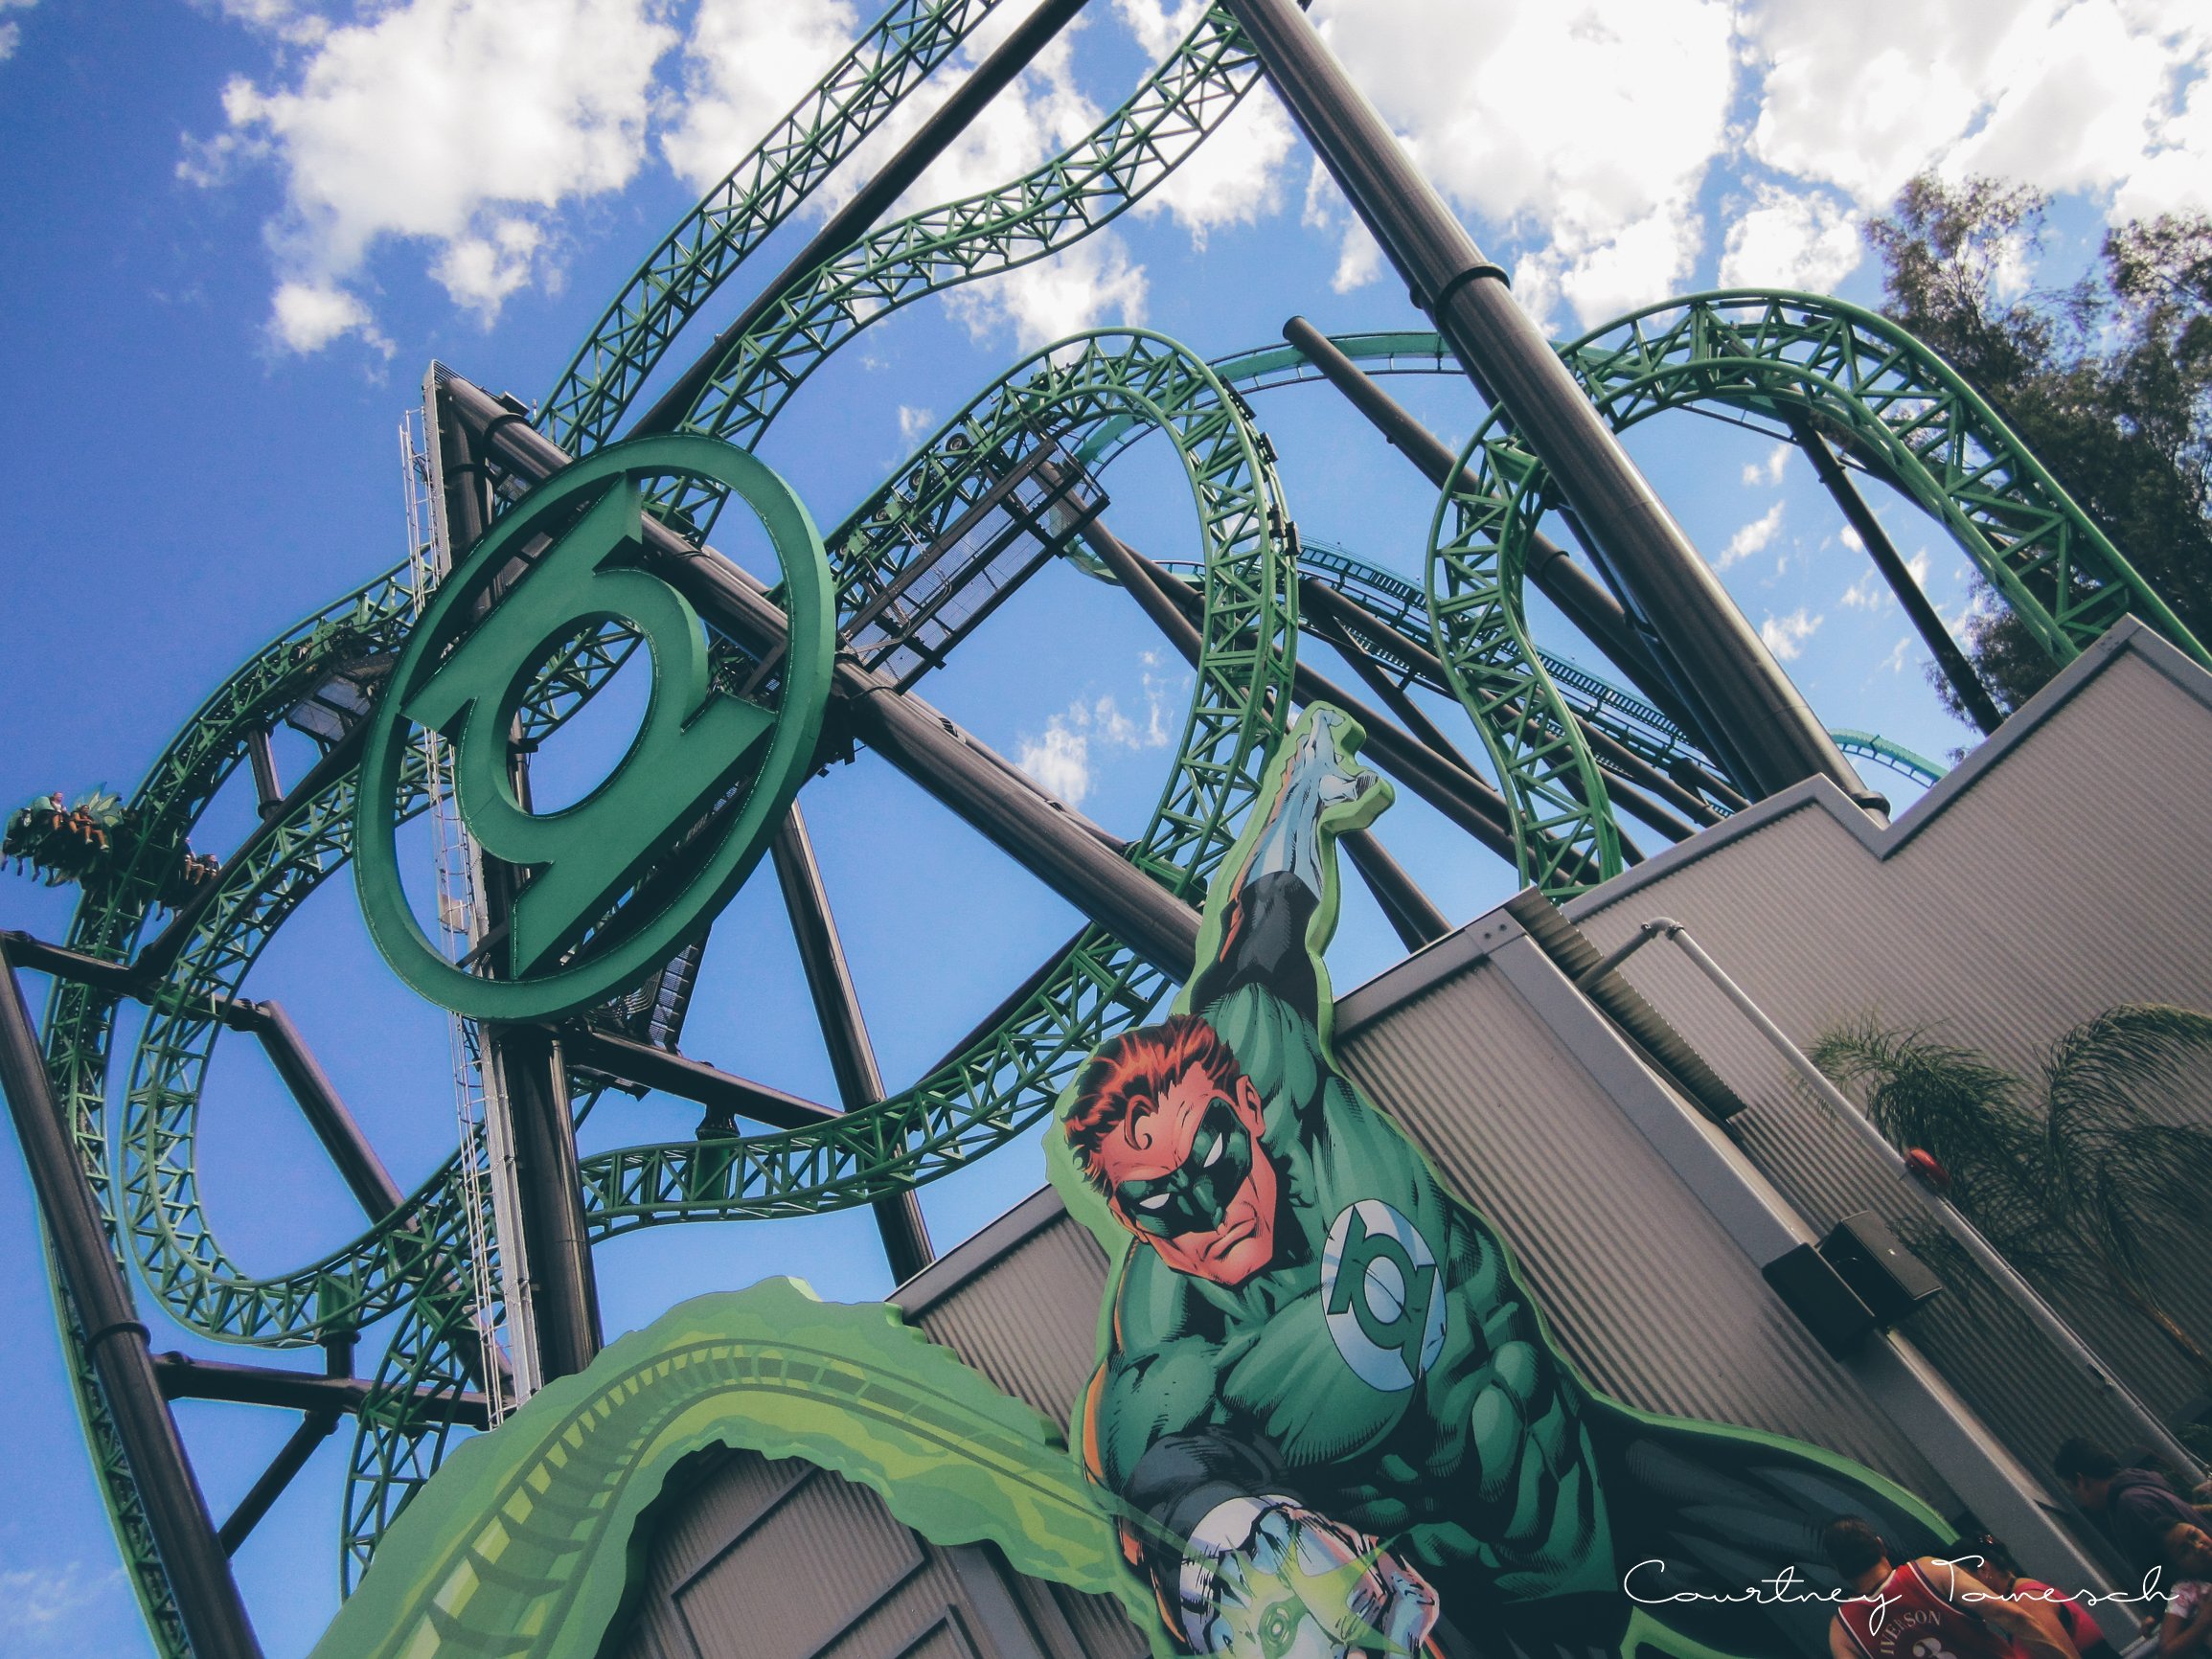   The new green lantern ride.  Didn't like this ride at all. I will not be riding it again!